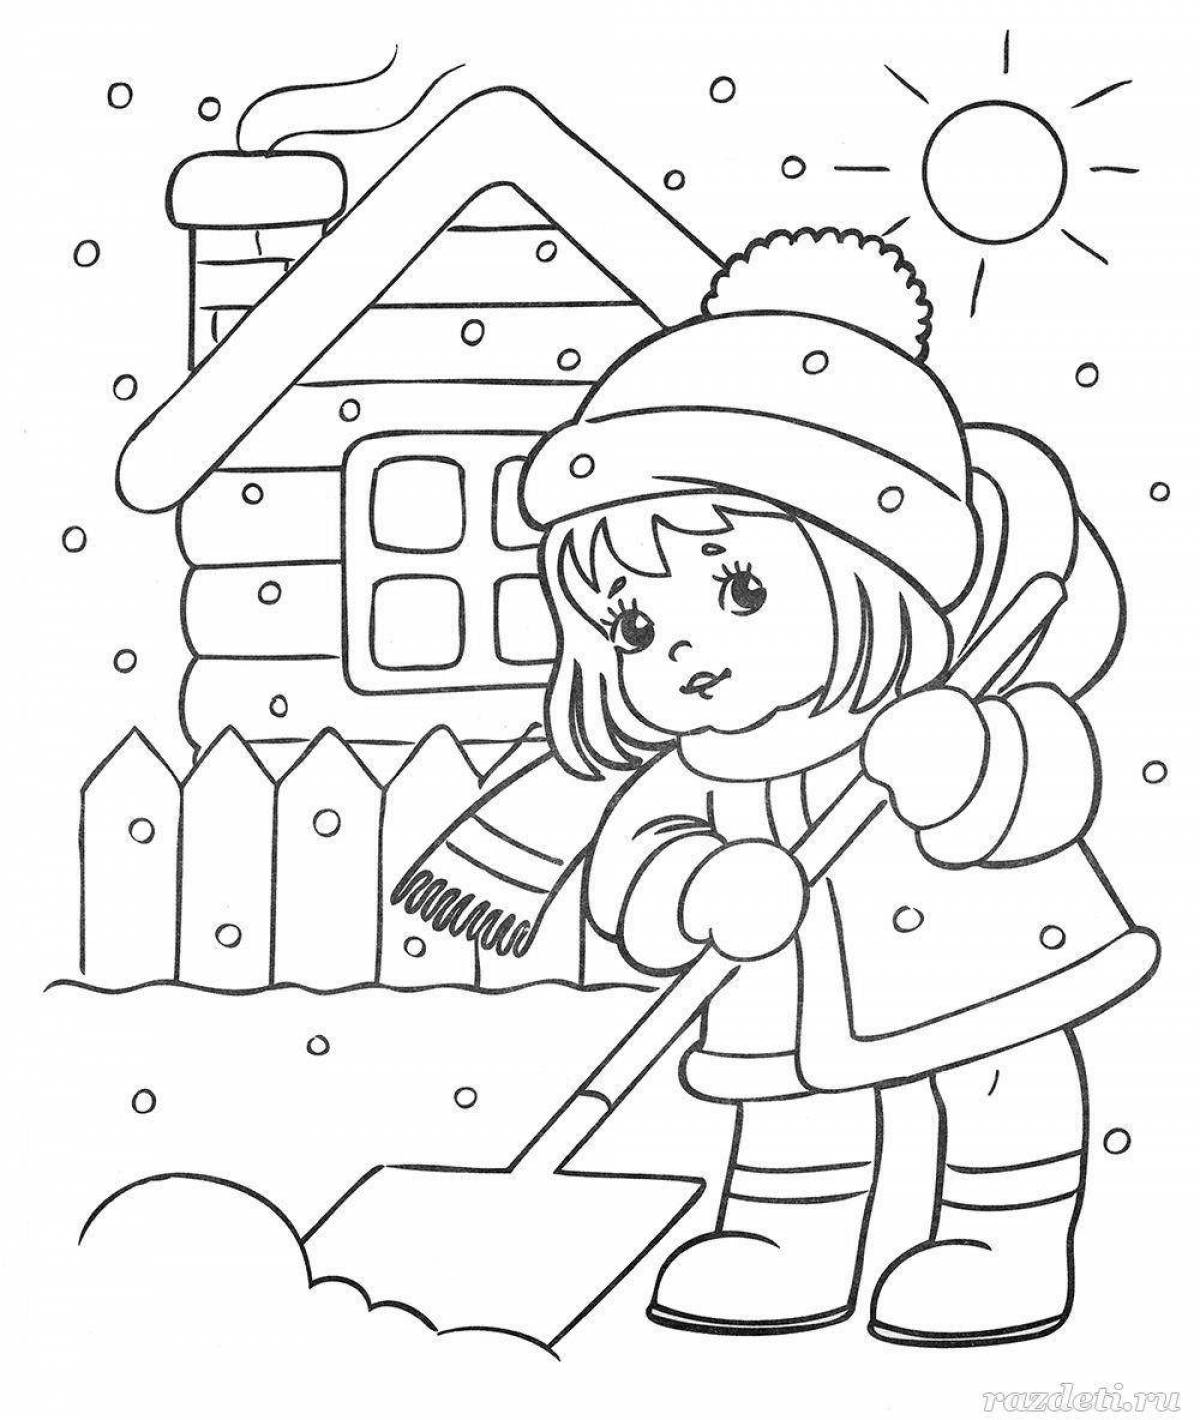 Bright coloring winter for children 5 years old